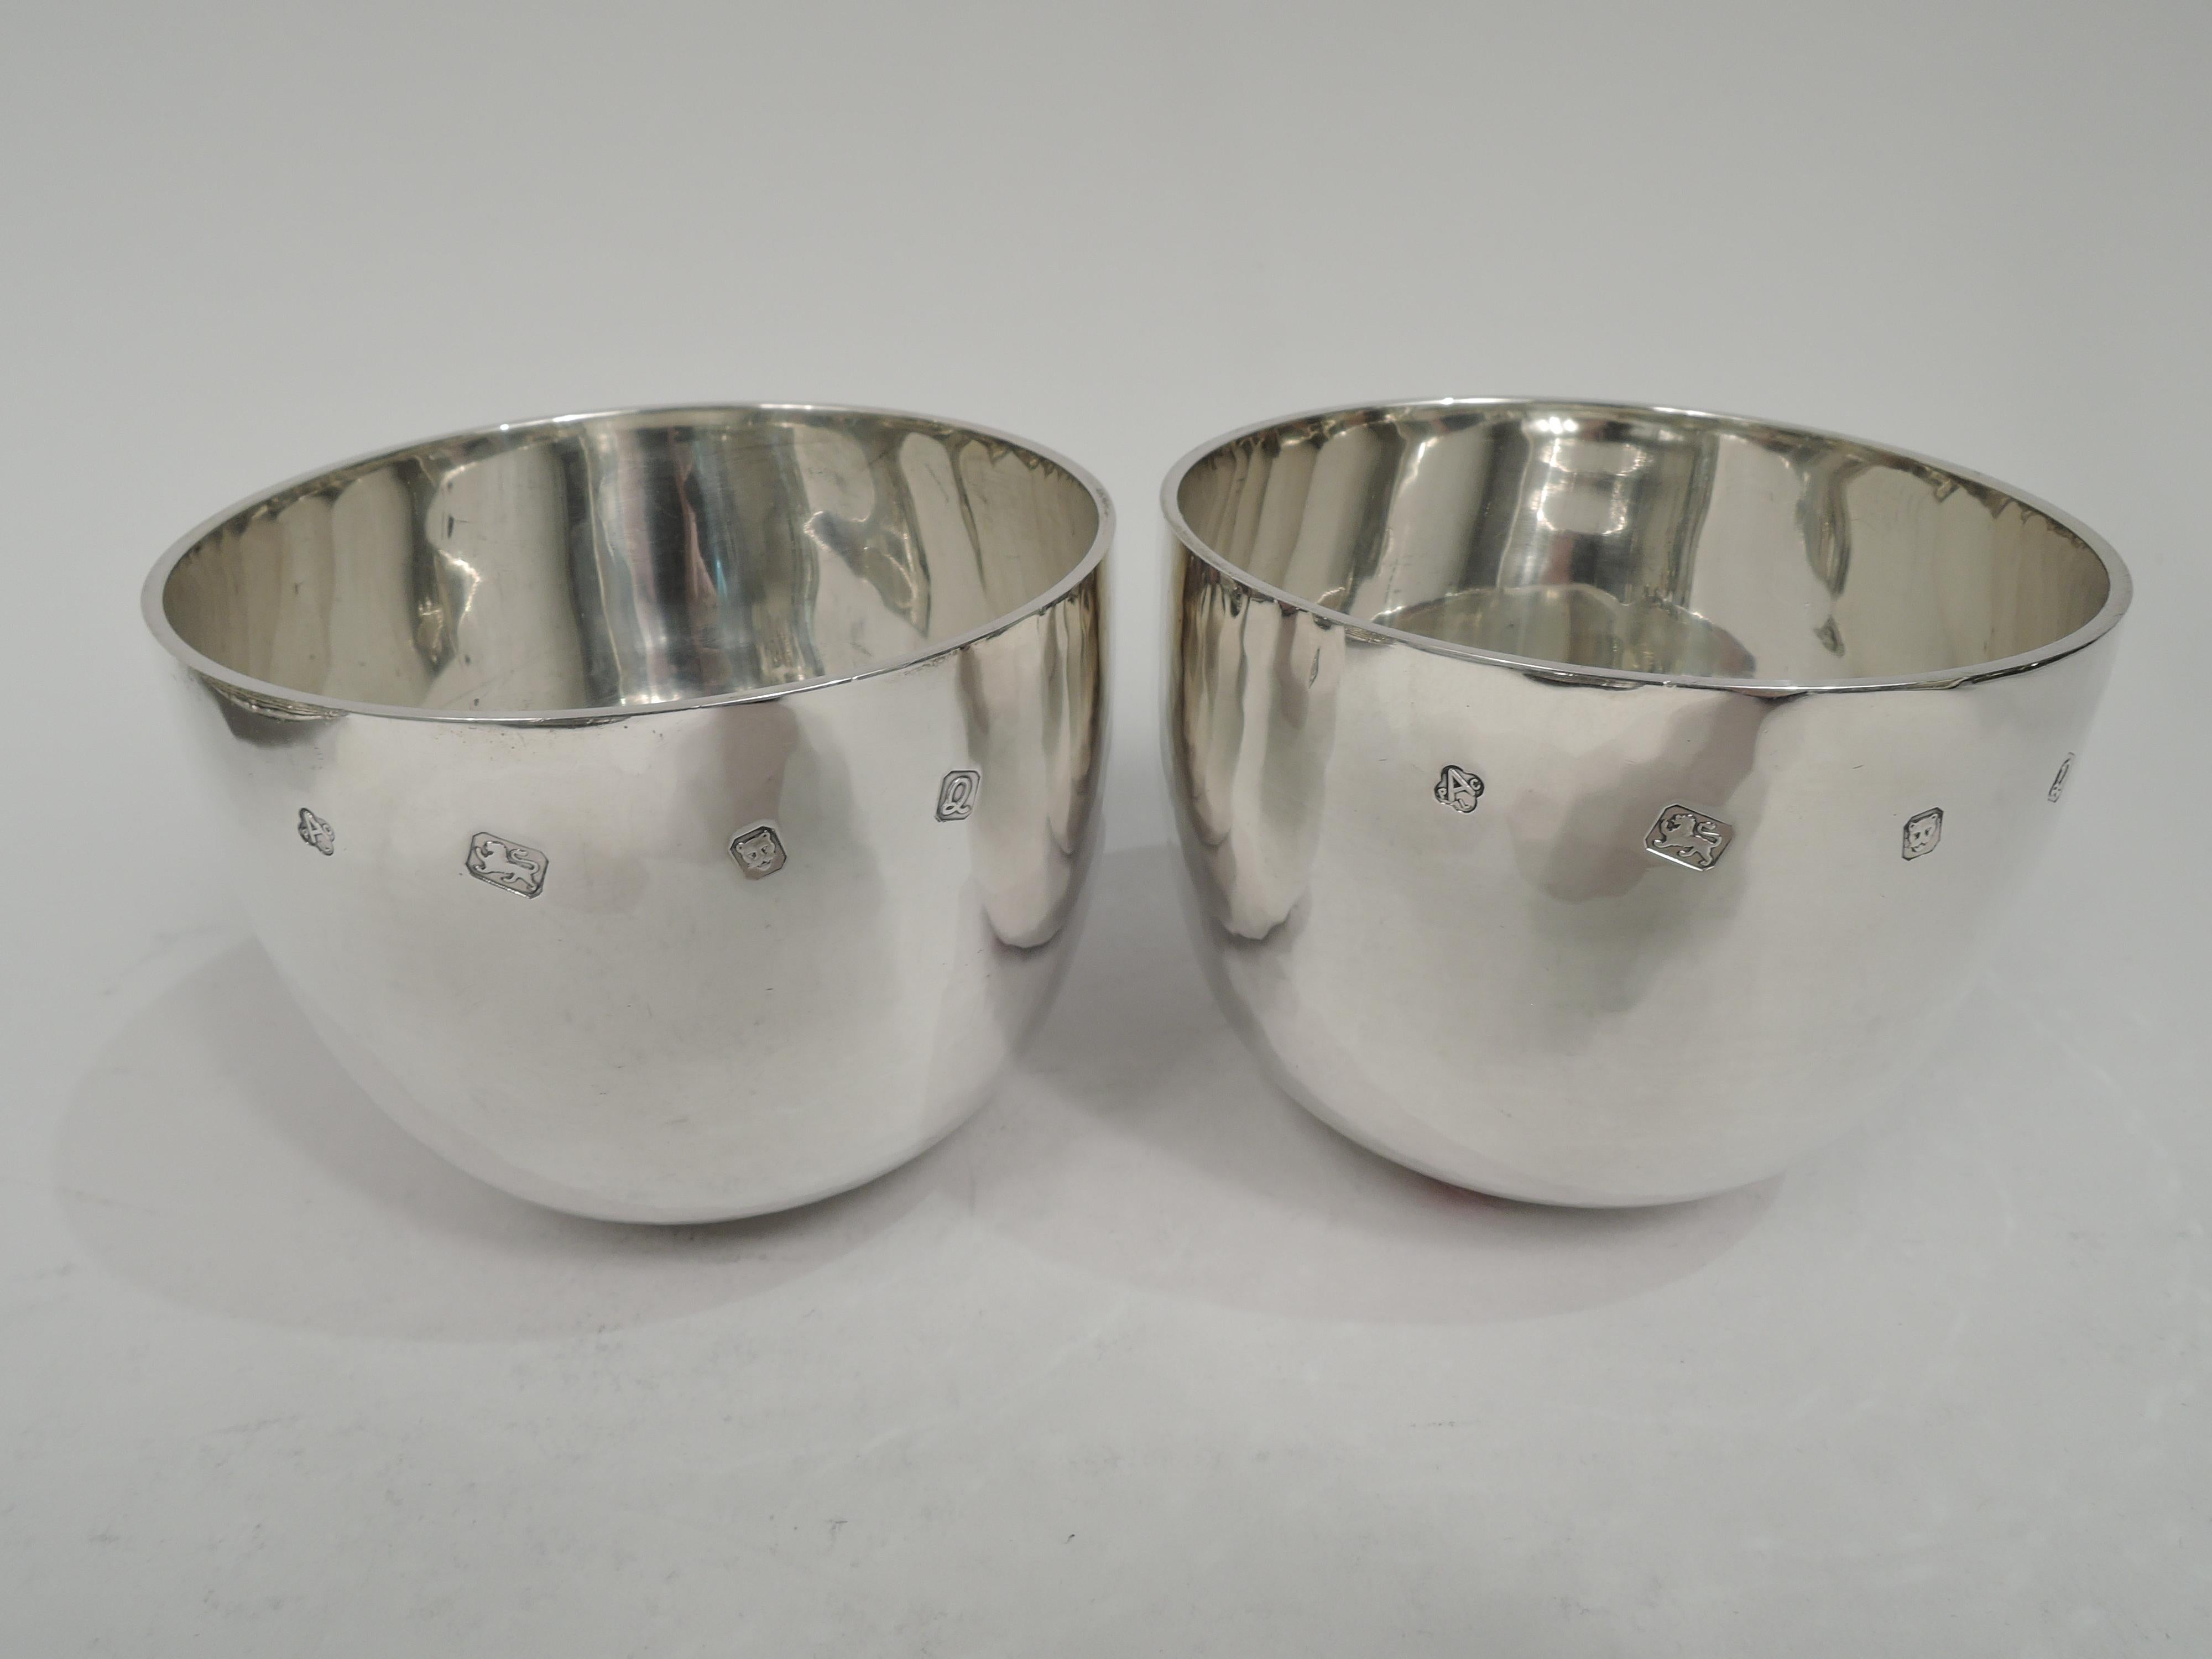 Pair of Elizabeth II sterling silver Jefferson cups. Made by Asprey in London in 1990. Each: Traditional form with straight sides and curved bottom. Easy grip with a gentle, soothing rock. Hand hammered with nice shimmer. Perfect for a twosome